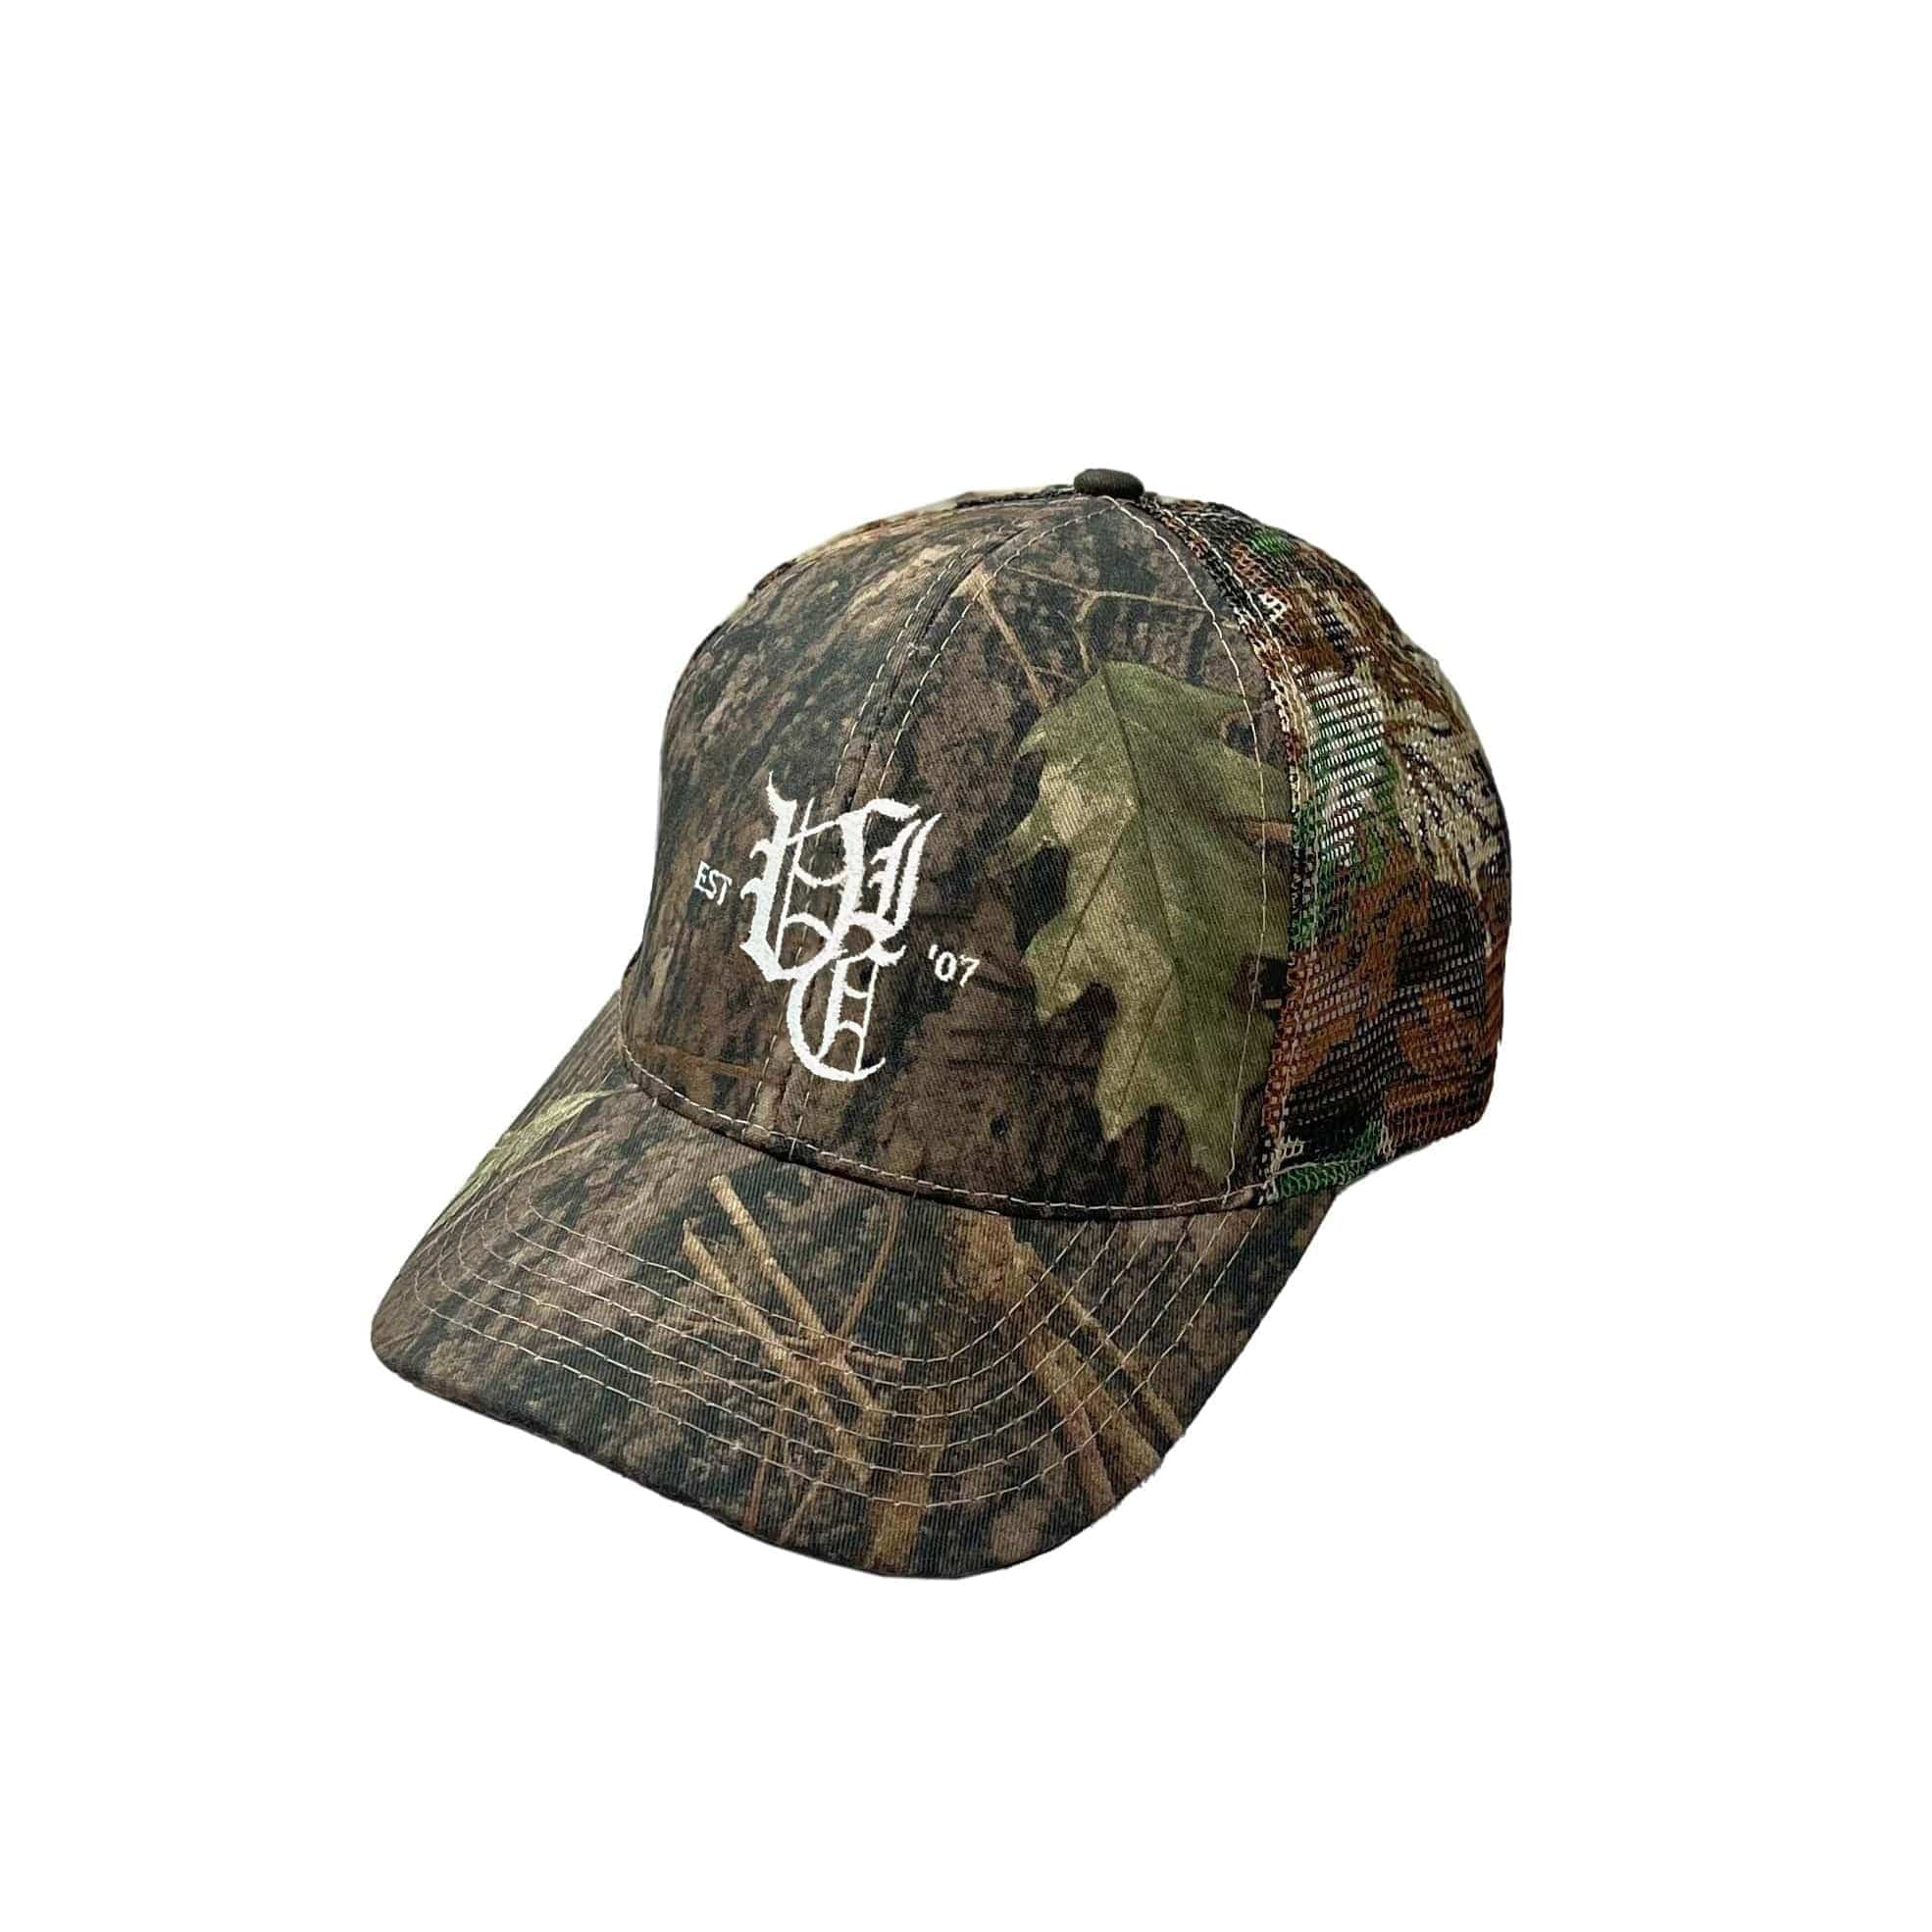 Discover the ultimate in outdoor style with our Realtree Camo trucker Hat. Made from durable True Timber printed fabric, this structured hat features an embroidered logo for an authentic touch. With an adjustable fastener and one-size-fits-all design, it's perfect for any adventure. Embrace the wild in style with this functional and fashionable hat.